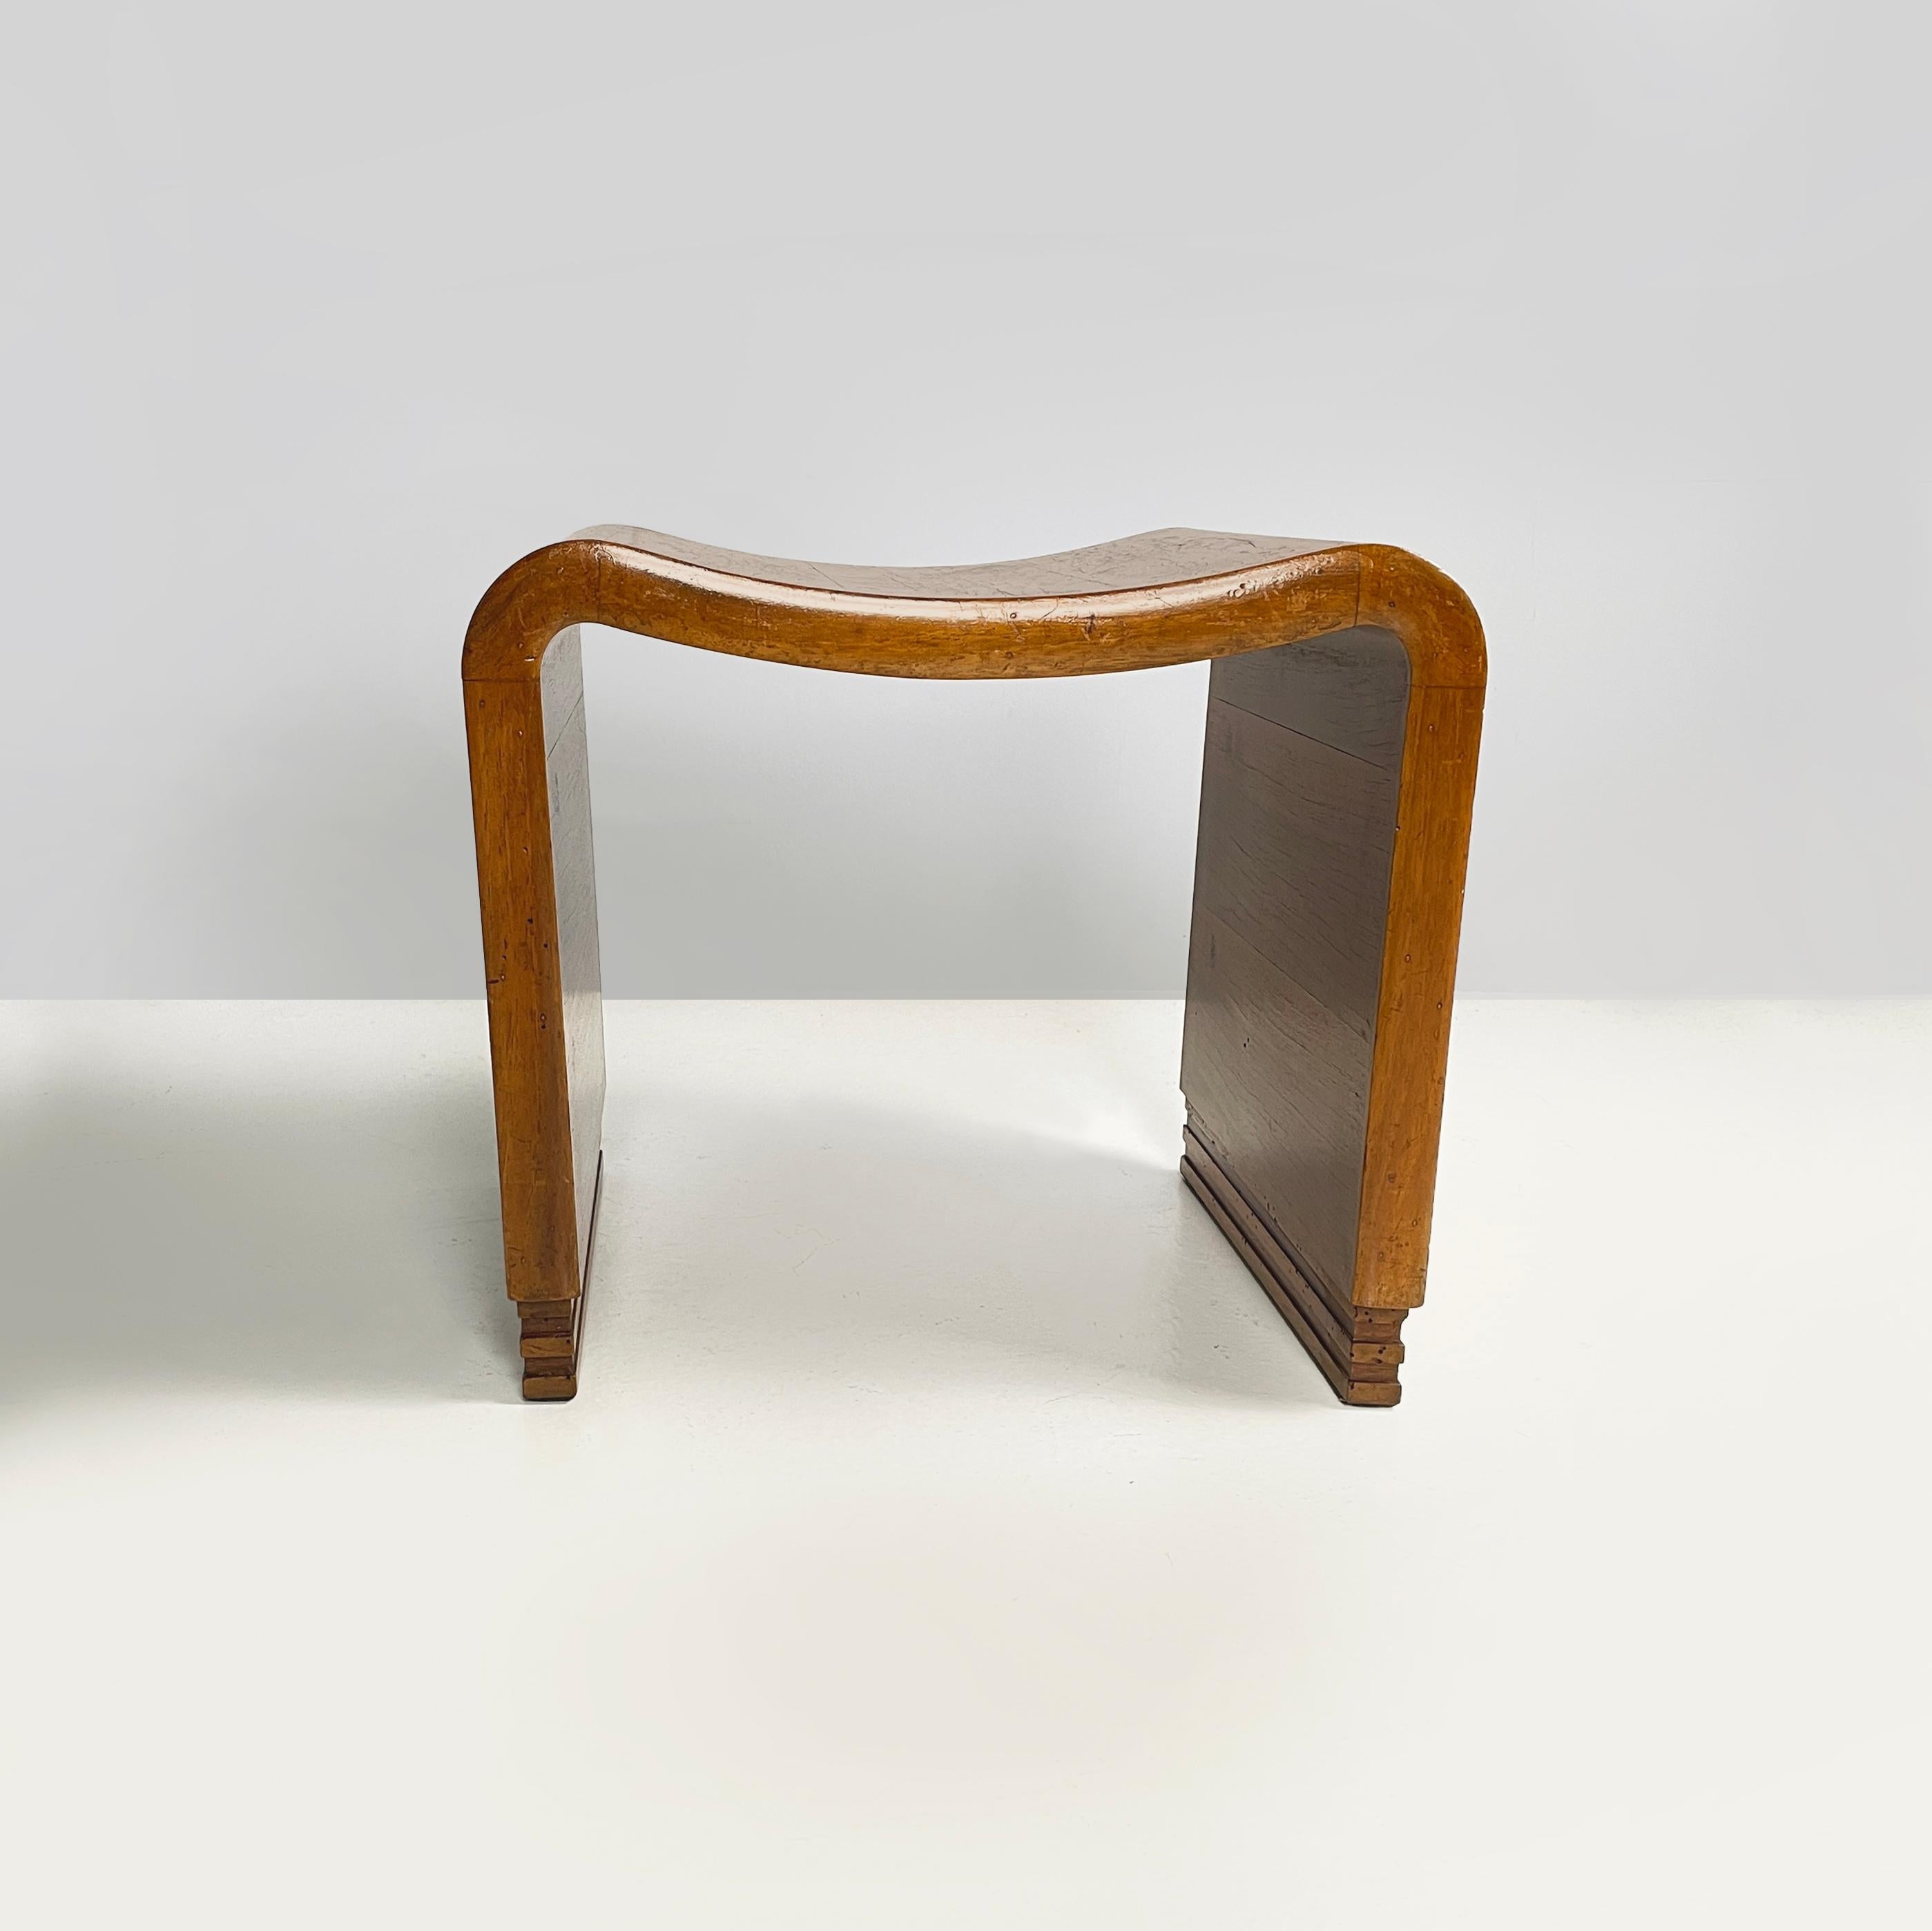 Italian art deco Stool in solid wood, 1930s
Table stool in solid wood with rectangular section. The seat is curved. The stool has only two legs with finely worked feet. Belonging to Art Deco.
1930s.
Good condition, light signs of aging.
Measurements